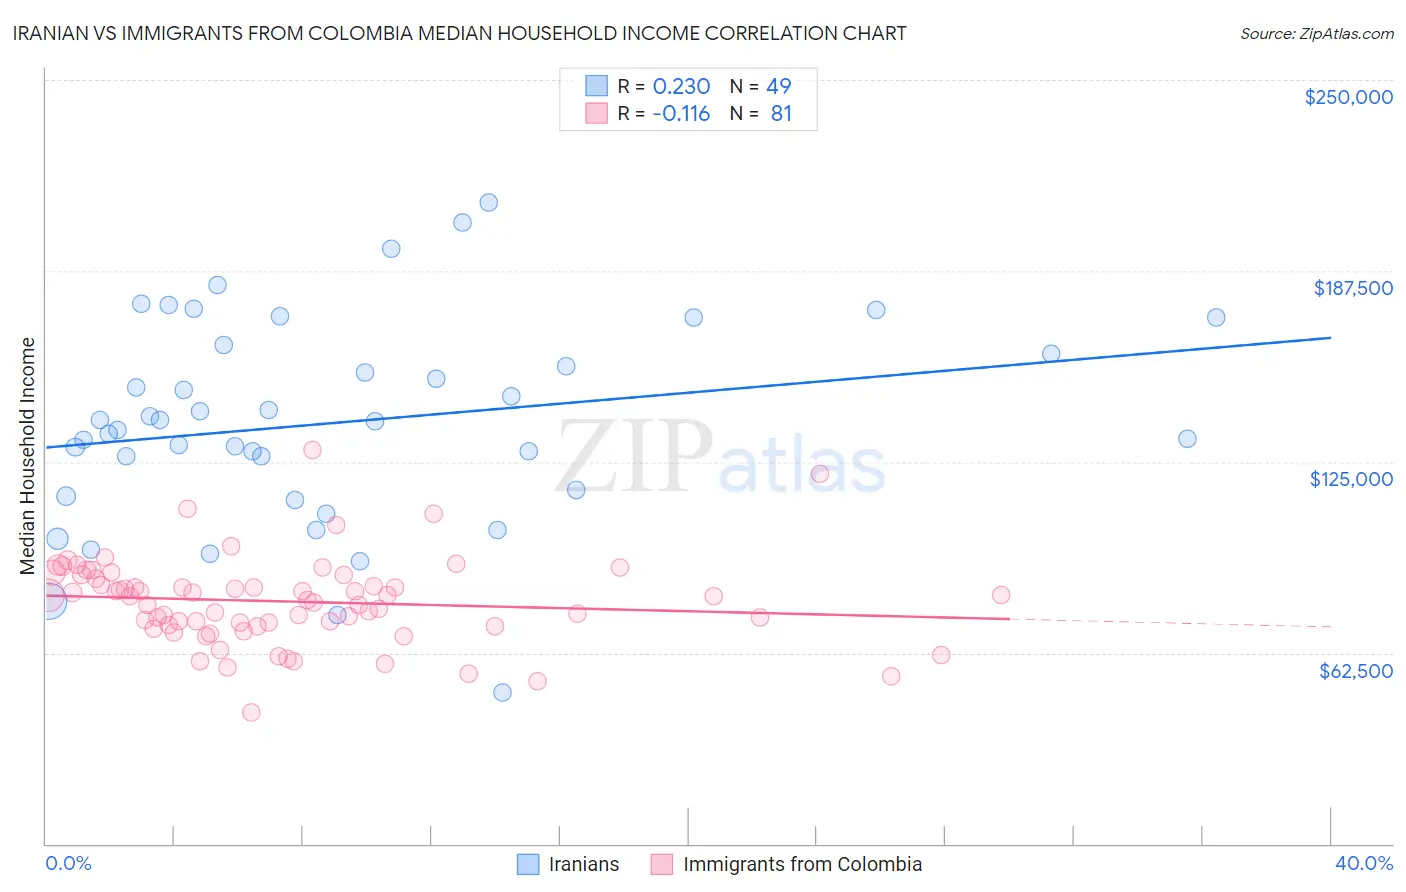 Iranian vs Immigrants from Colombia Median Household Income